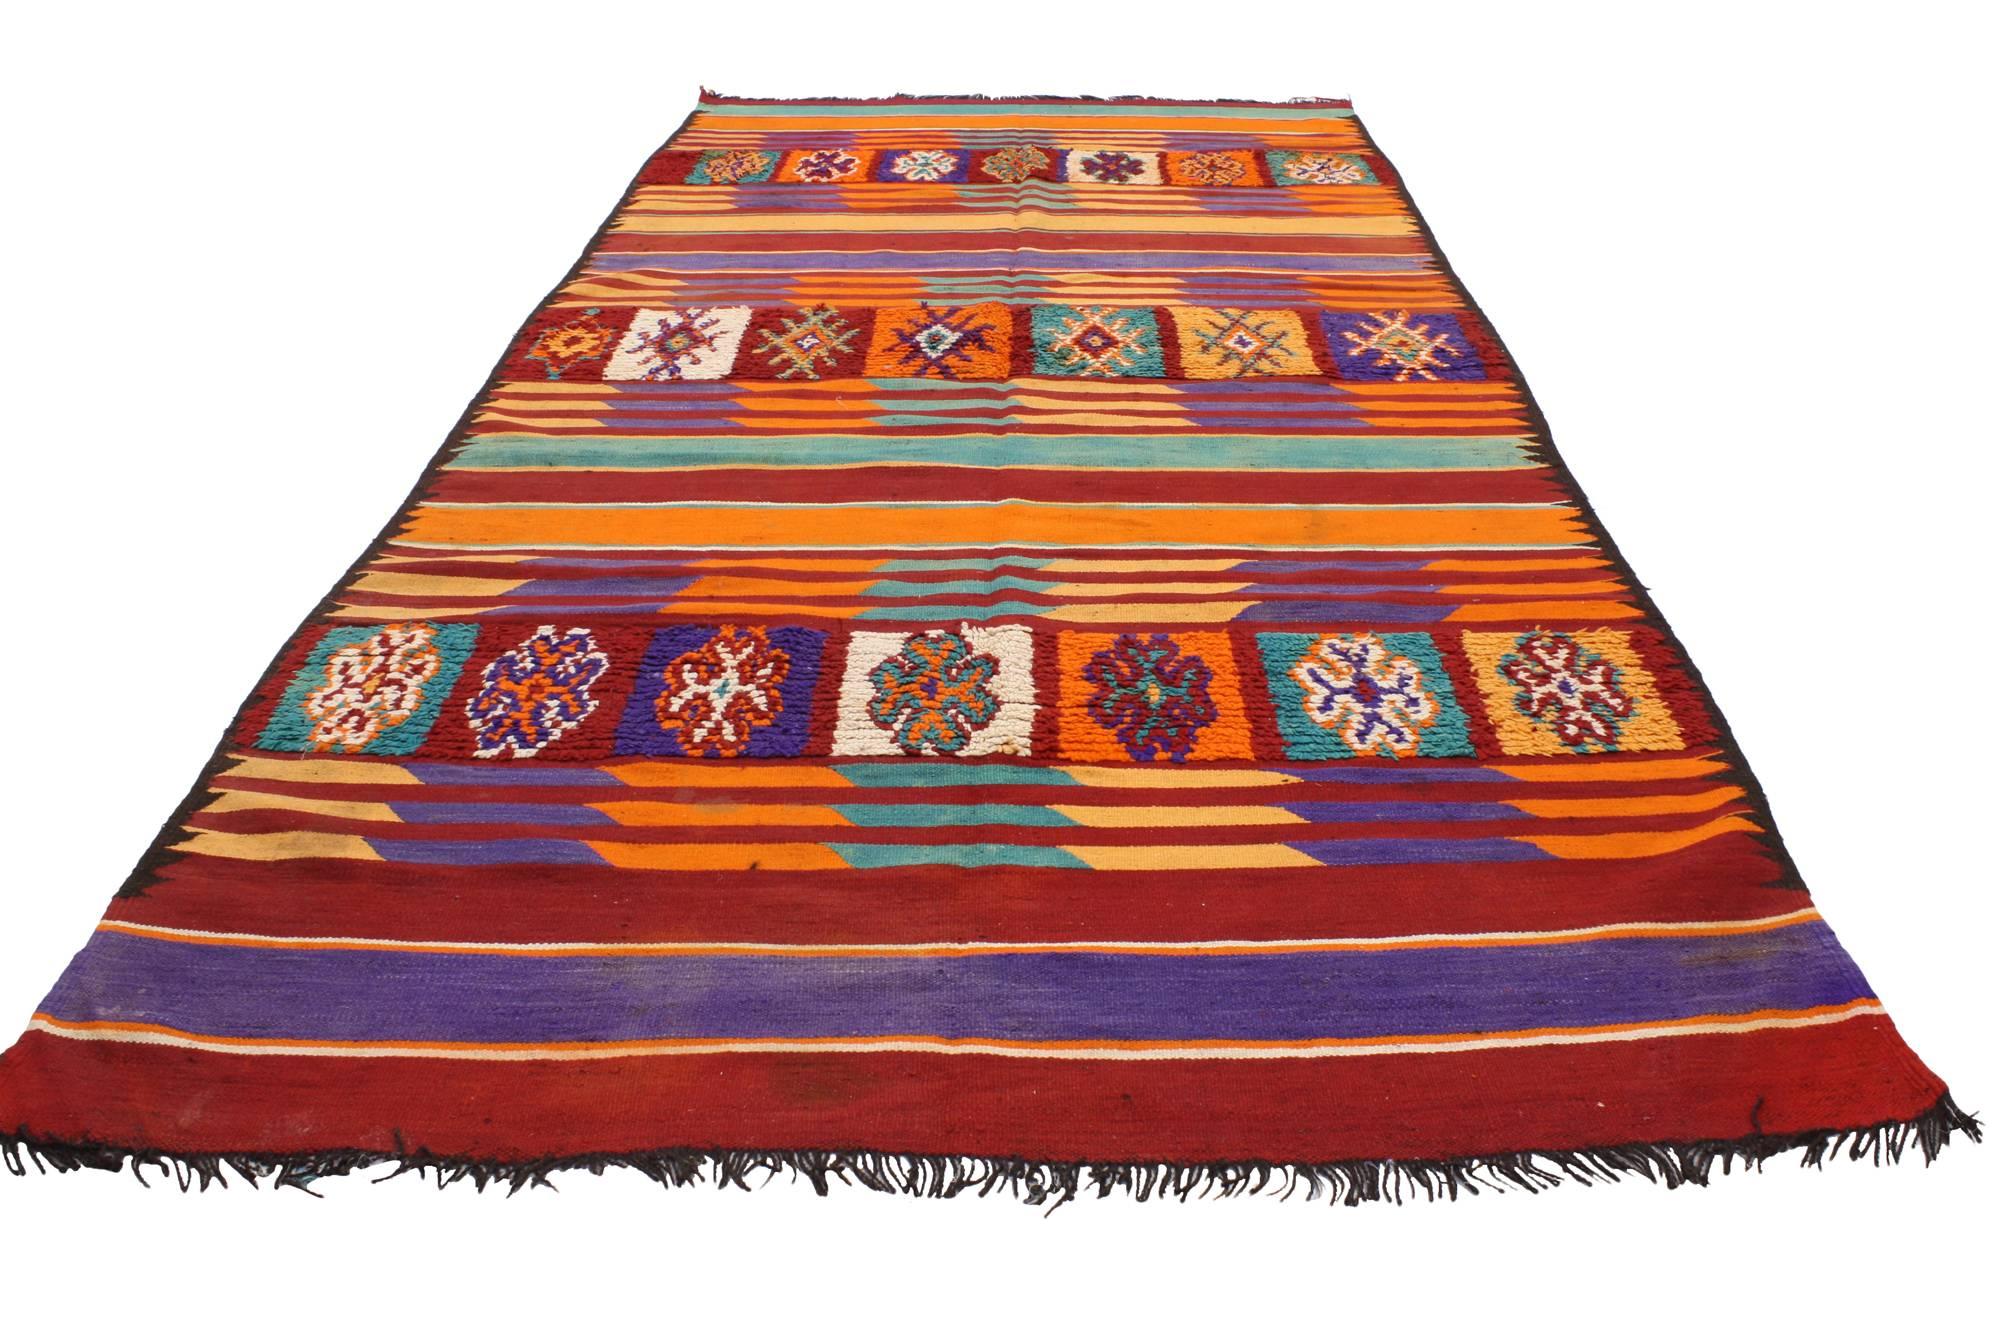 20th Century Vintage Berber Moroccan Kilim Rug with Modern Cabin Style, Flat-weave Kilim Rug For Sale